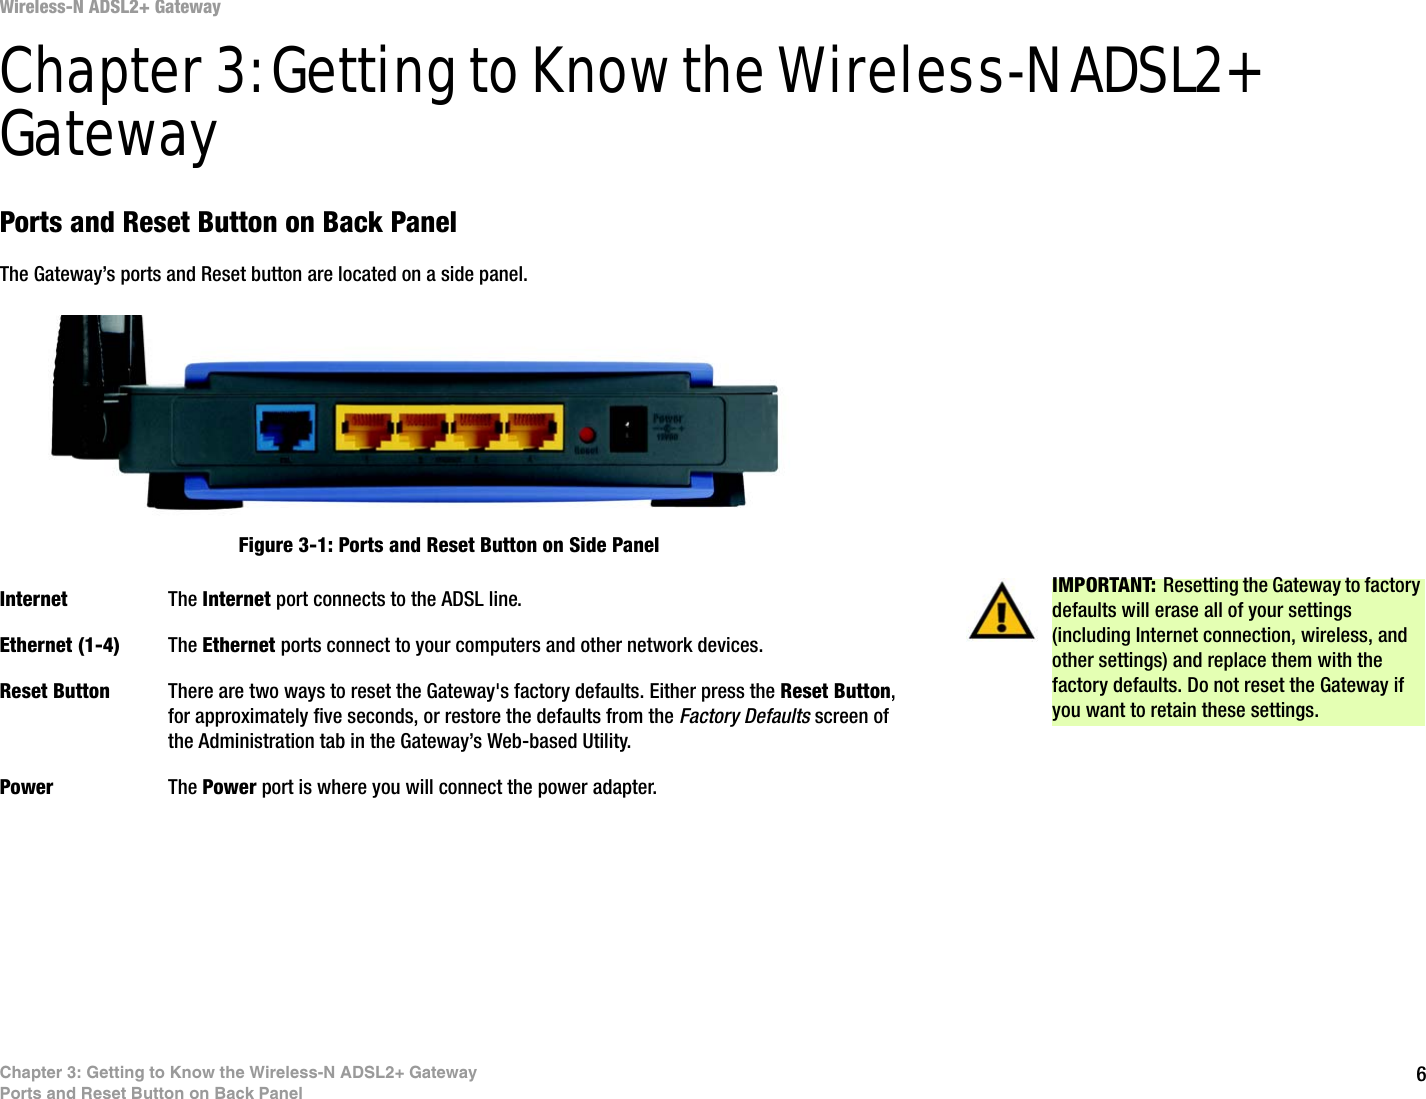 6Chapter 3: Getting to Know the Wireless-N ADSL2+ GatewayPorts and Reset Button on Back PanelWireless-N ADSL2+ GatewayChapter 3: Getting to Know the Wireless-N ADSL2+ GatewayPorts and Reset Button on Back PanelThe Gateway’s ports and Reset button are located on a side panel.Internet The Internet port connects to the ADSL line.Ethernet (1-4) The Ethernet ports connect to your computers and other network devices.Reset Button There are two ways to reset the Gateway&apos;s factory defaults. Either press the Reset Button, for approximately five seconds, or restore the defaults from the Factory Defaults screen of the Administration tab in the Gateway’s Web-based Utility.Power The Power port is where you will connect the power adapter.IMPORTANT: Resetting the Gateway to factory defaults will erase all of your settings (including Internet connection, wireless, and other settings) and replace them with the factory defaults. Do not reset the Gateway if you want to retain these settings.Figure 3-1: Ports and Reset Button on Side Panel